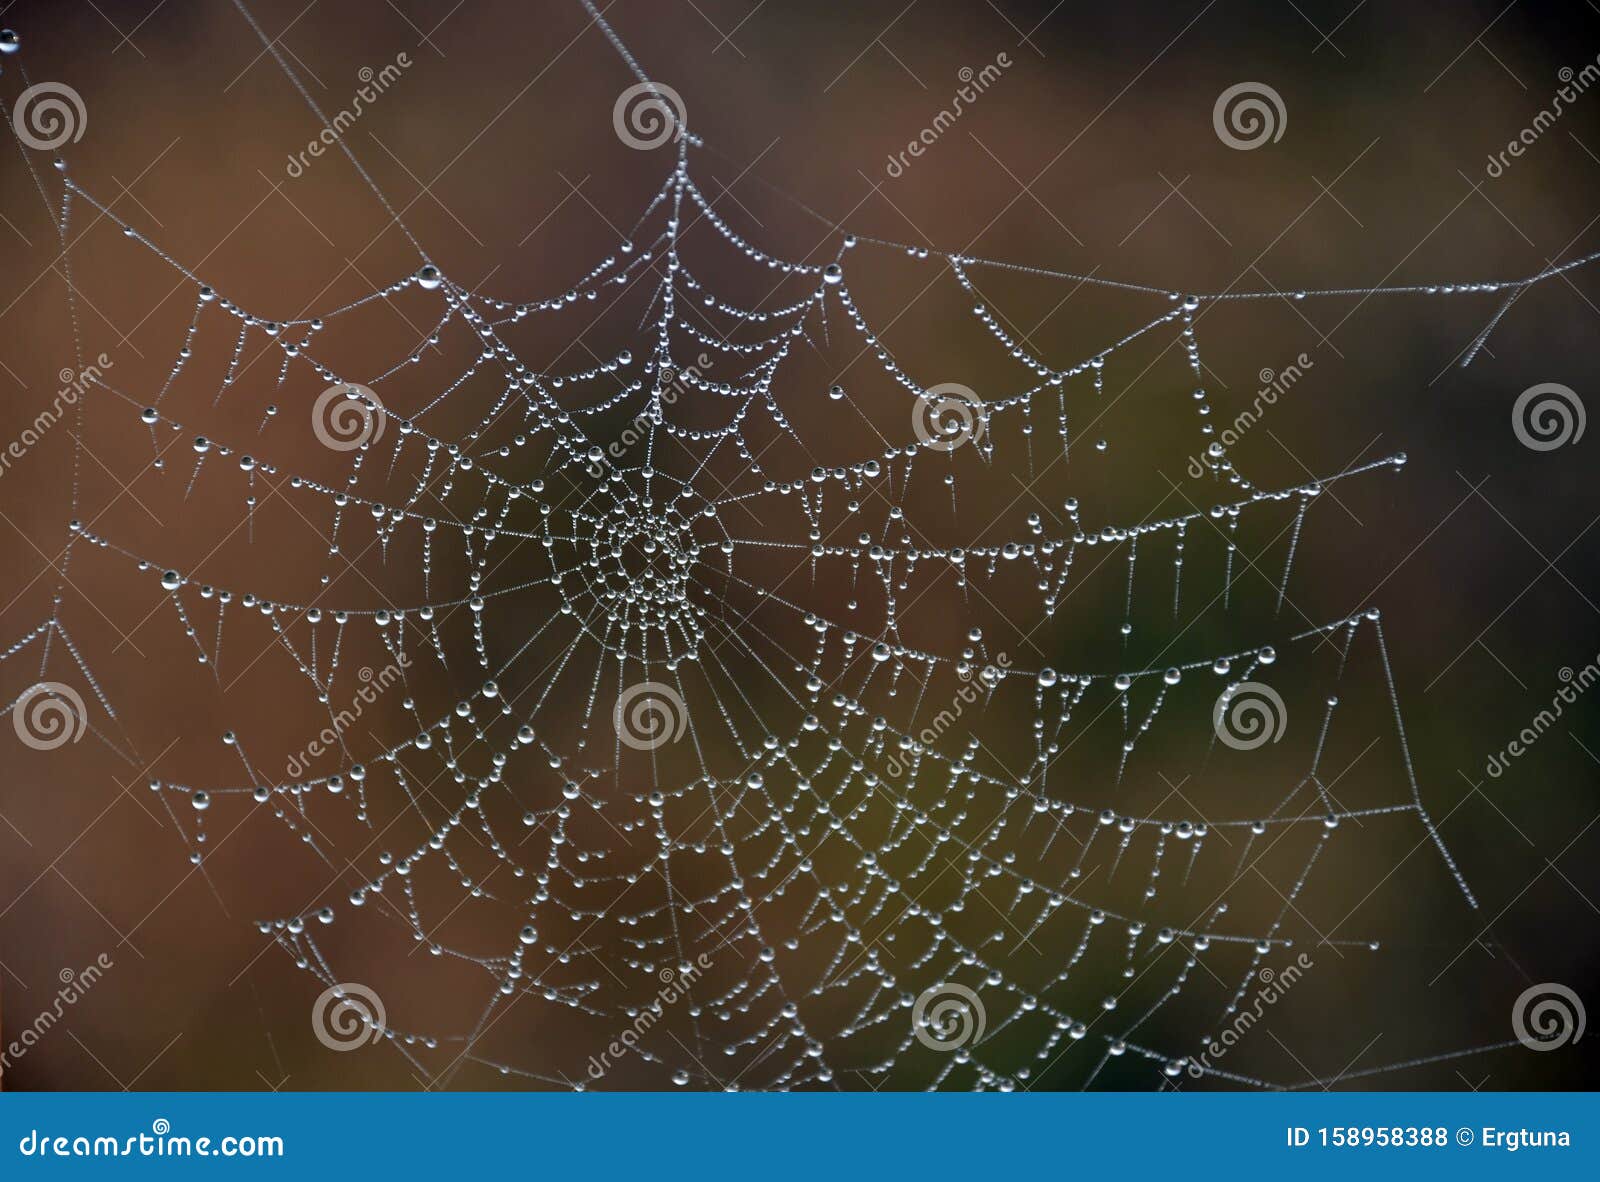 brilliant drops of dew on the spider web